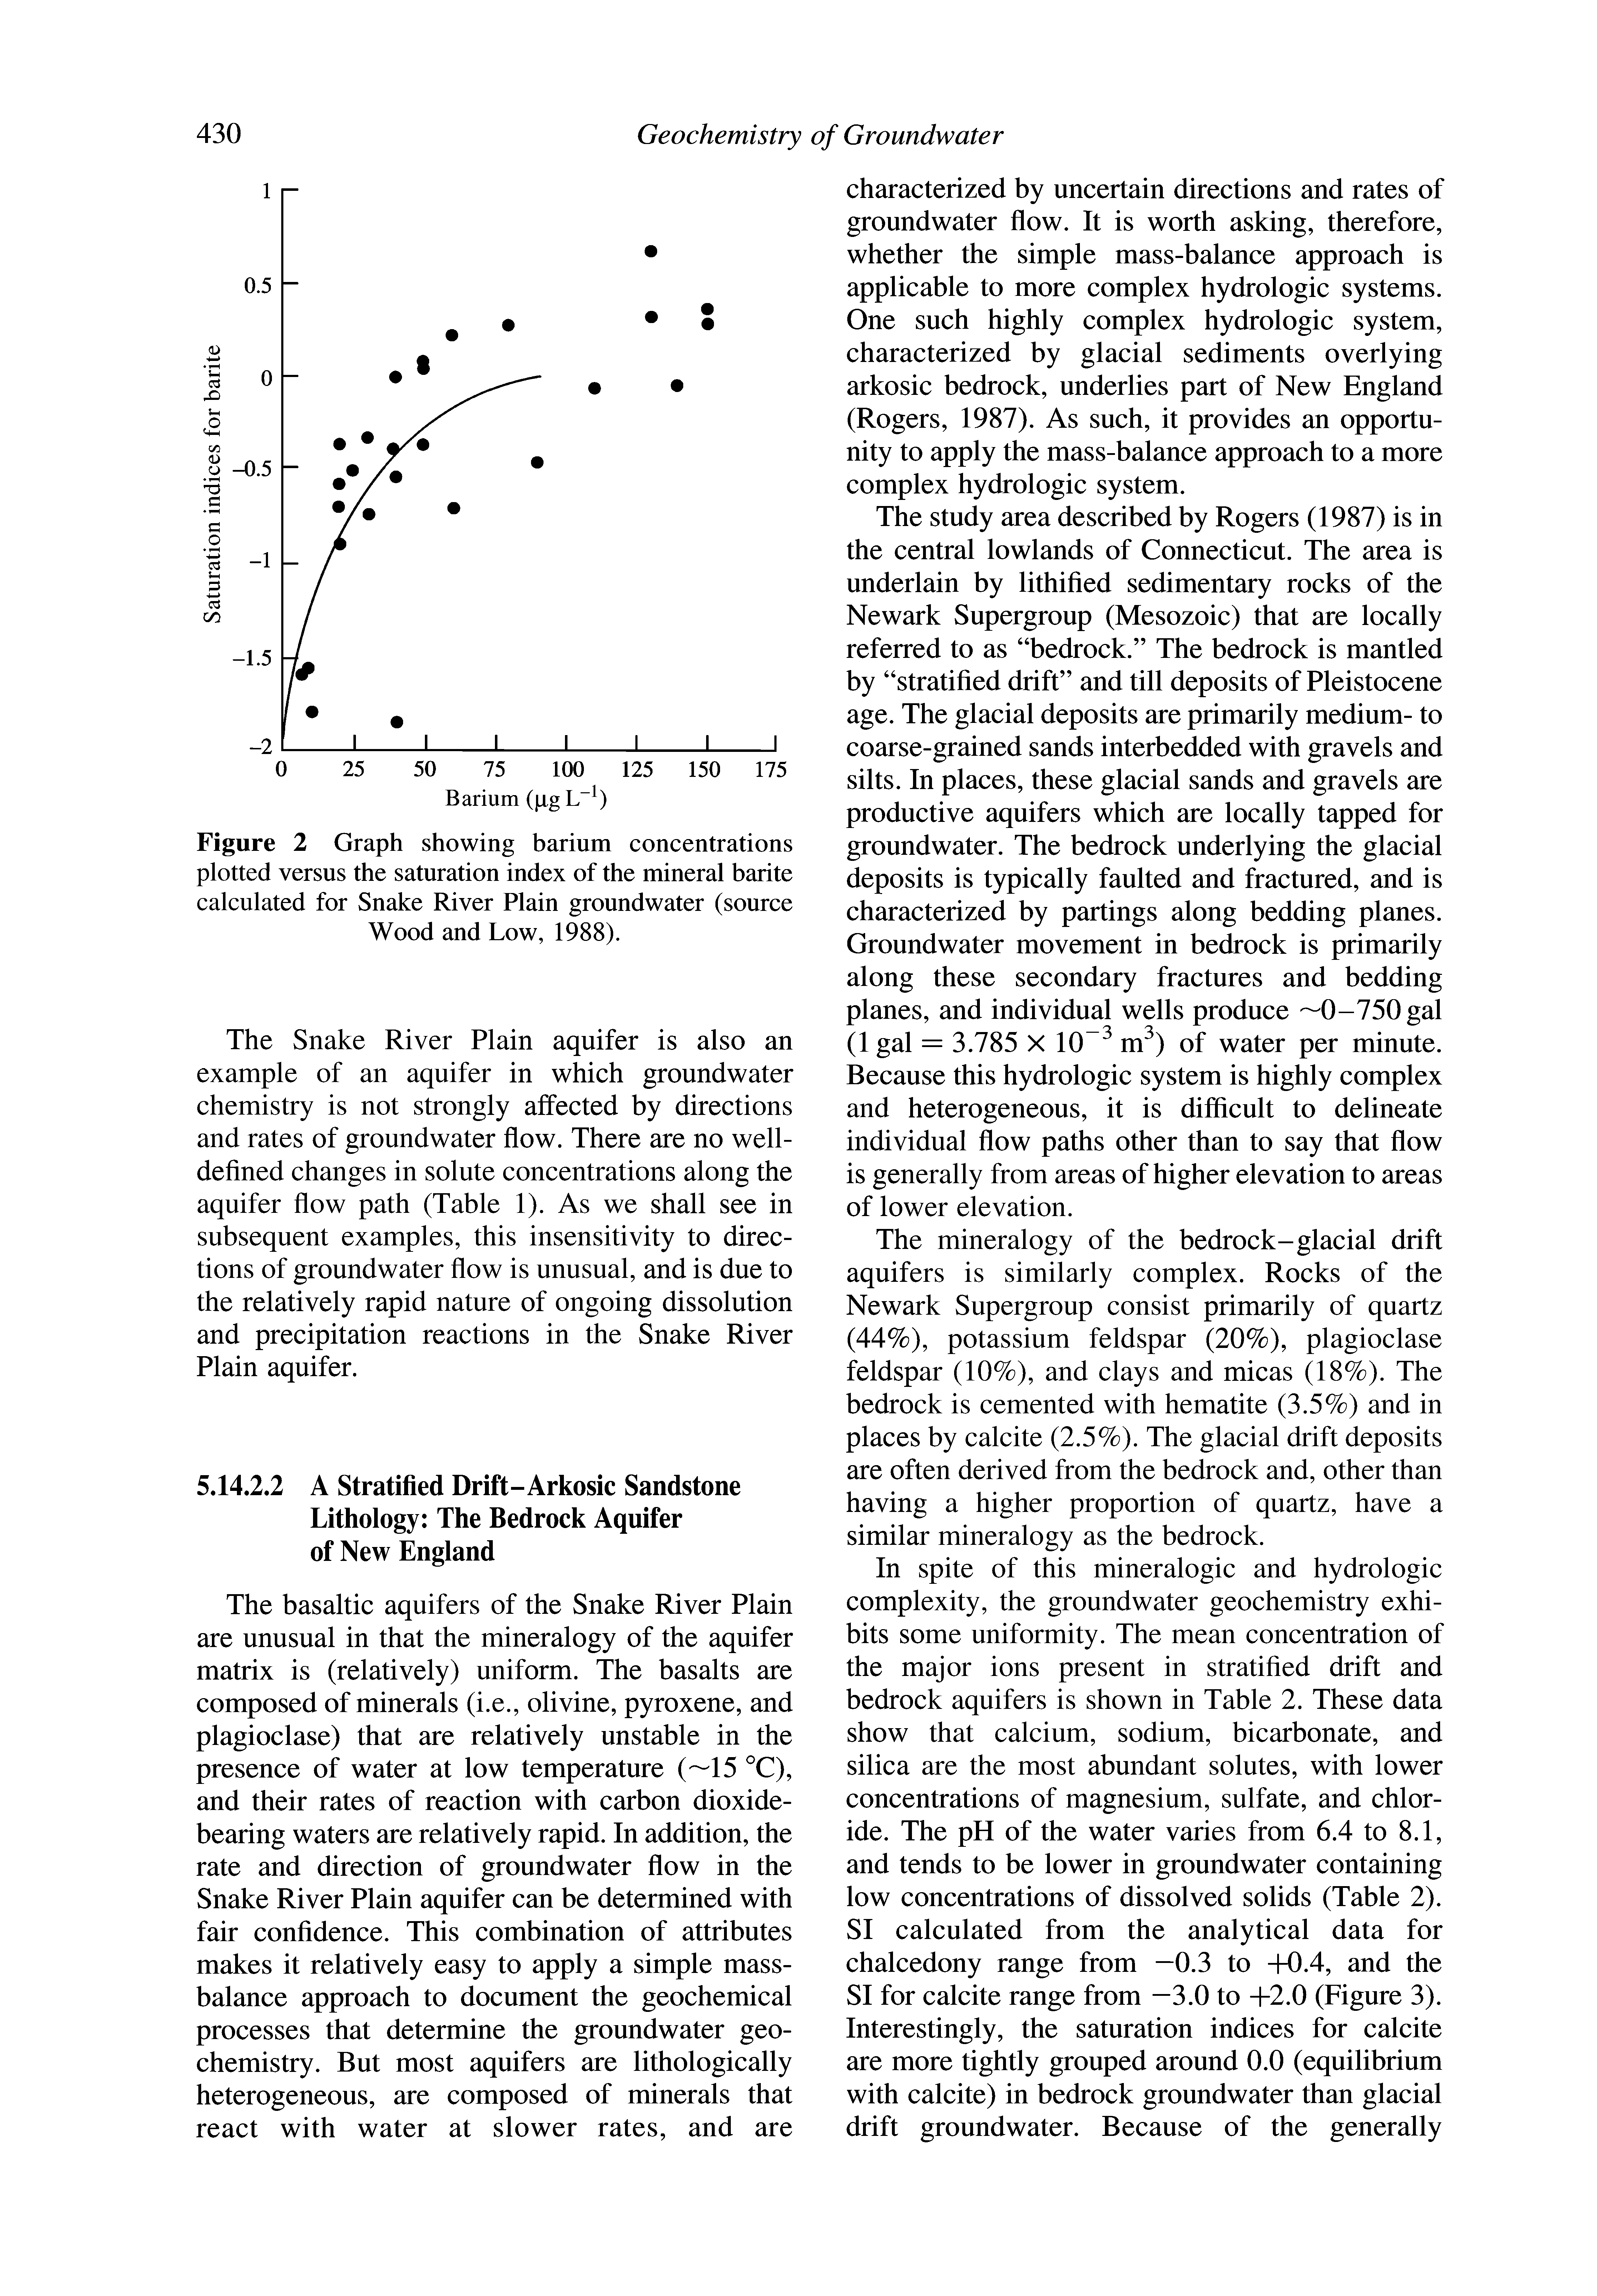 Figure 2 Graph showing barium concentrations plotted versus the saturation index of the mineral barite calculated for Snake River Plain groundwater (source Wood and Low, 1988).